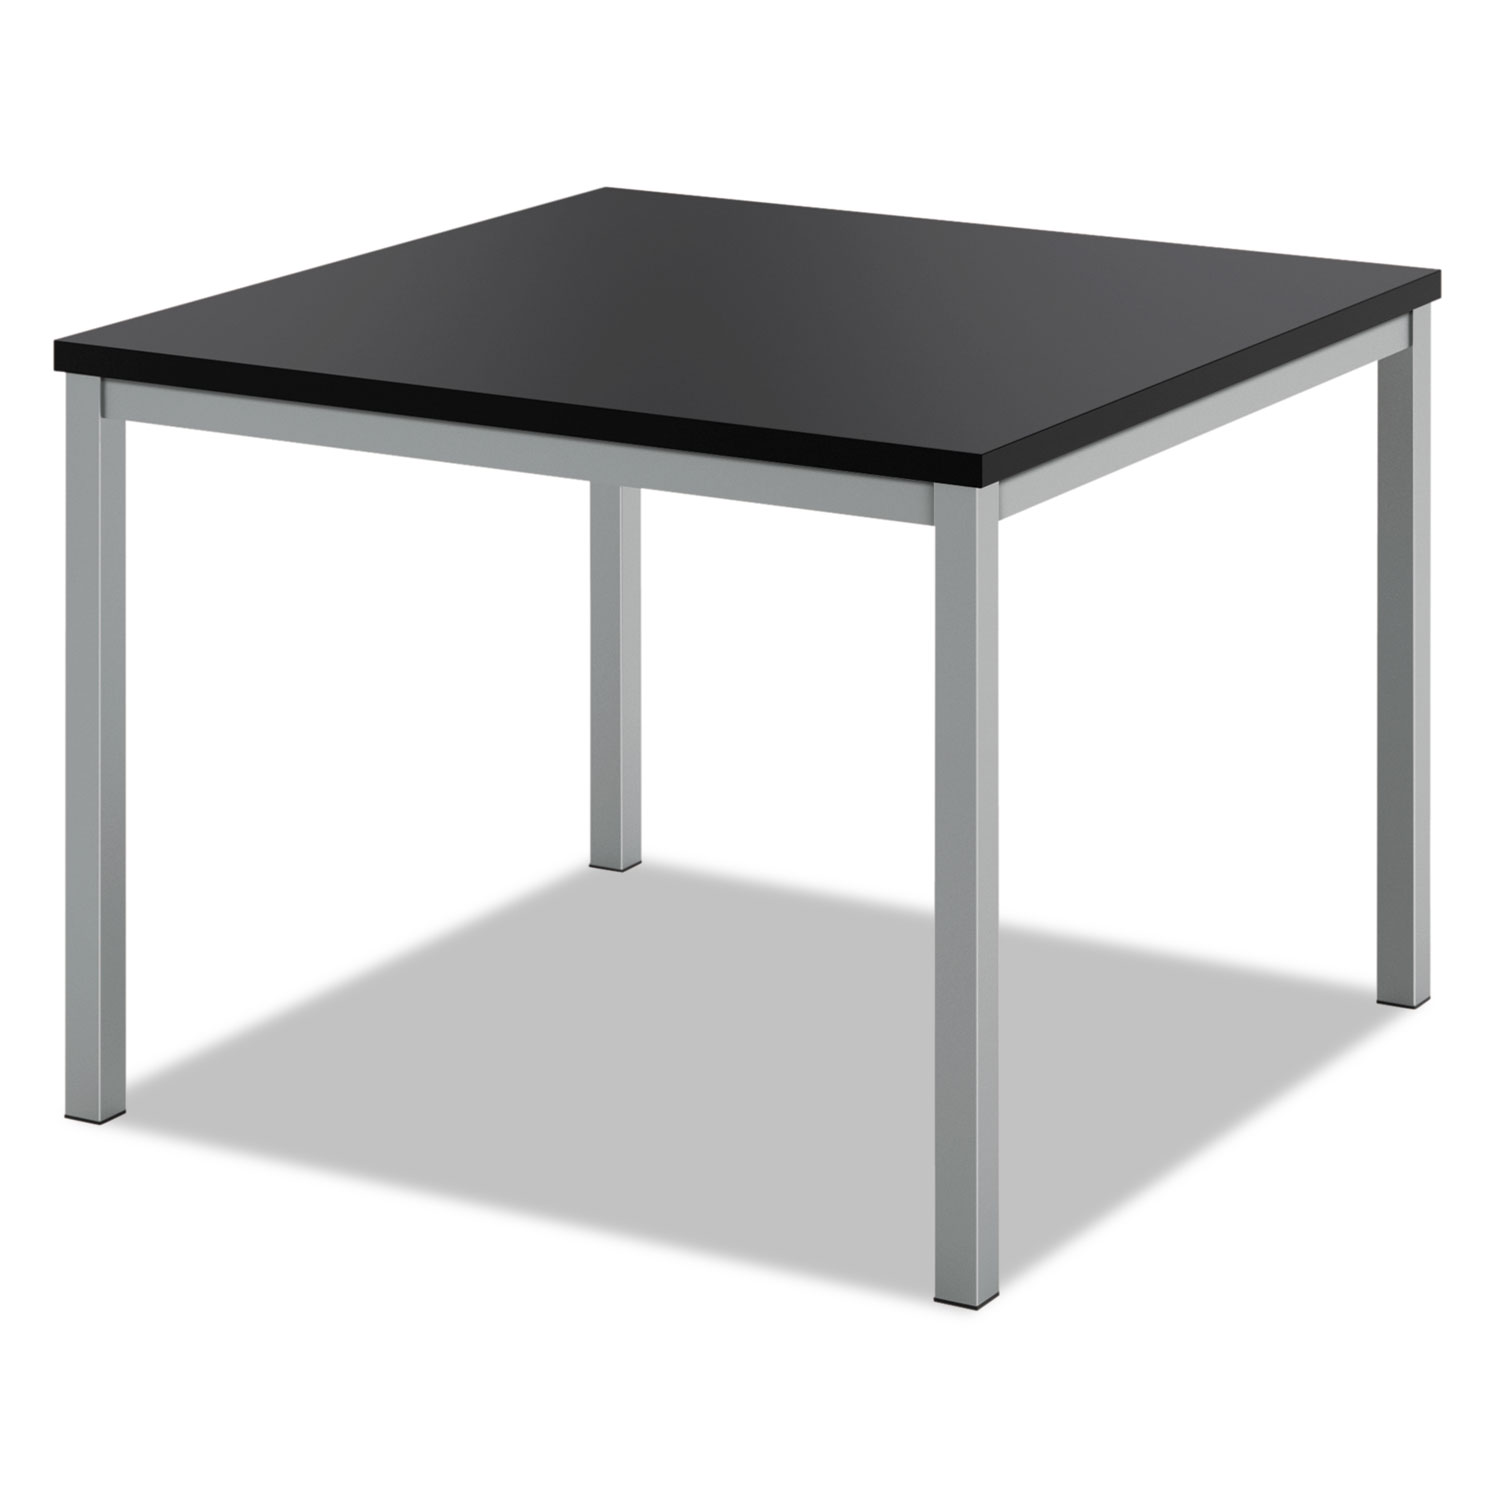  HON HML8851.P Occasional Corner Table, 24w x 24d, Black (BSXHML8851P) 